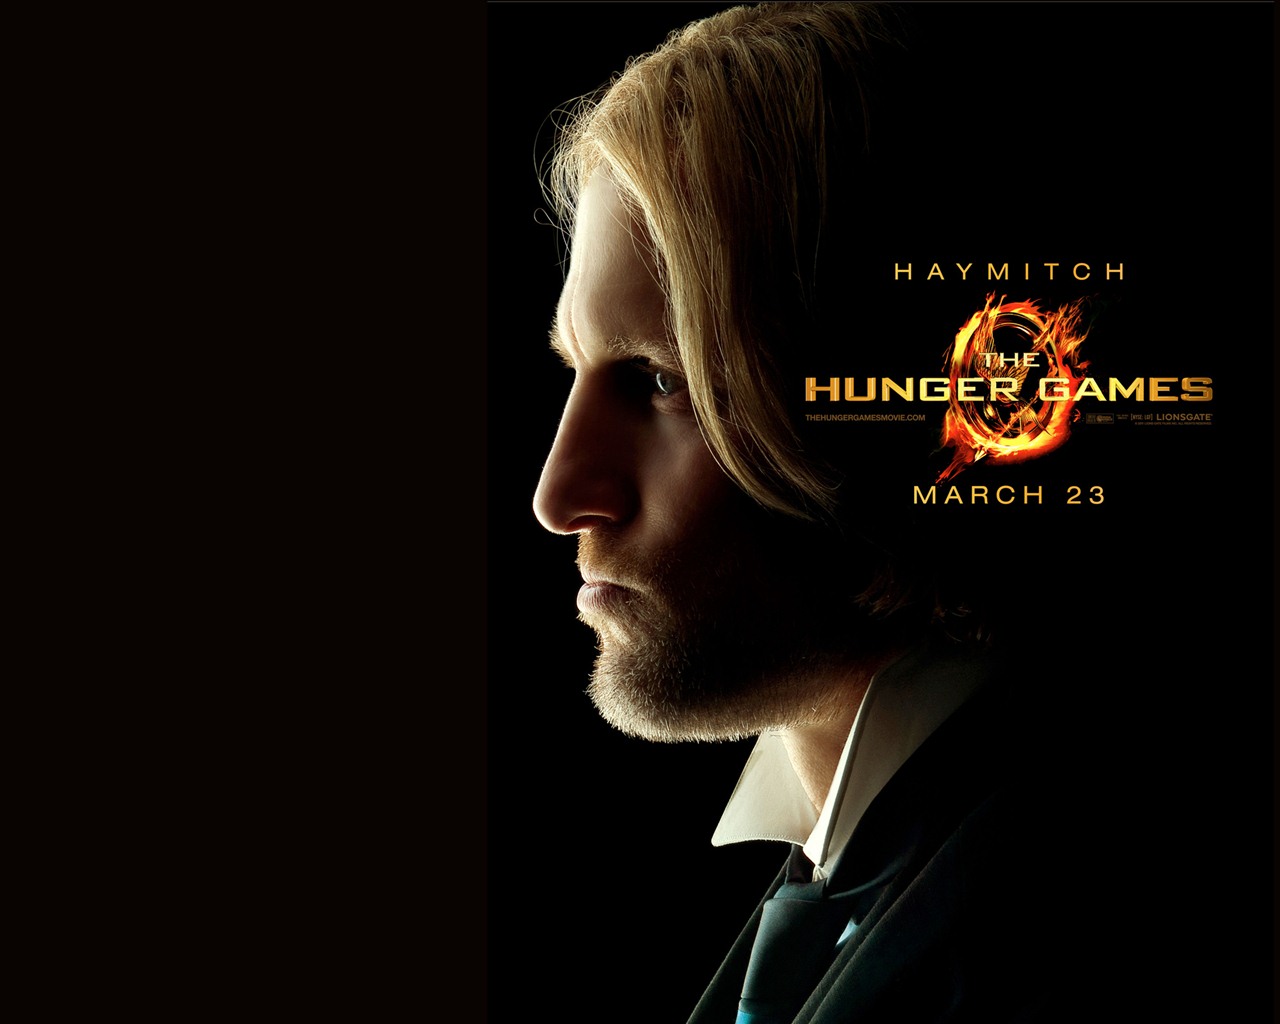 The Hunger Games HD wallpapers #12 - 1280x1024